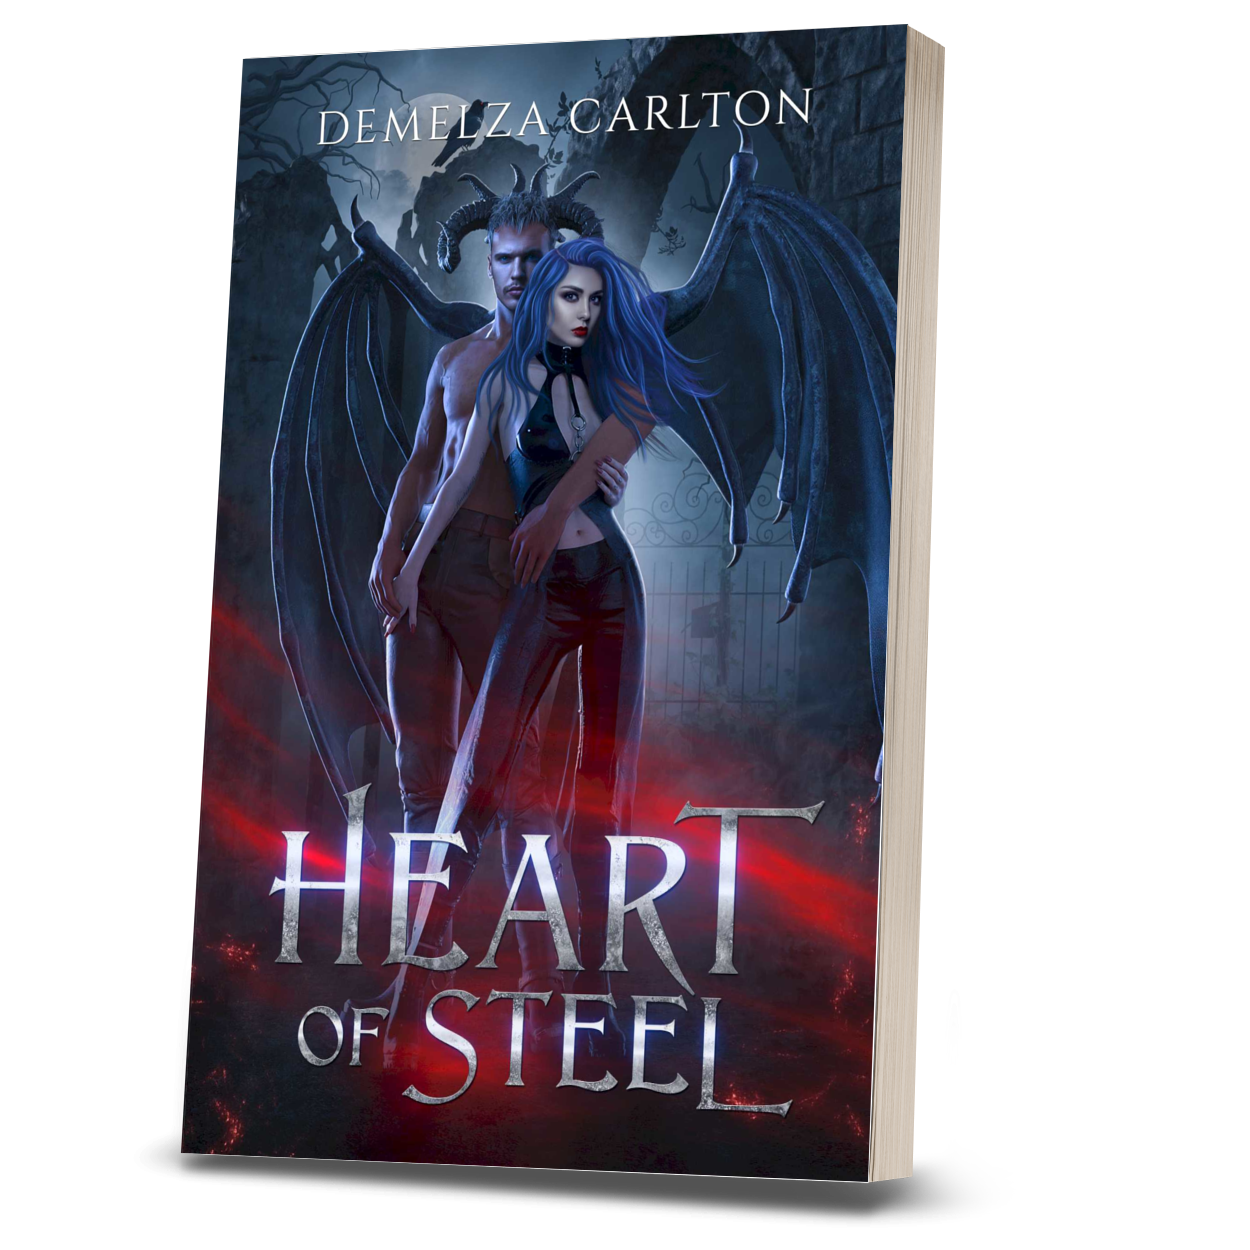 A steamy paranormal protector demon gargoyle monster romance tale for fans of Sarah J Maas, ACOTAR, Rebecca Yarros and Charlaine Harris